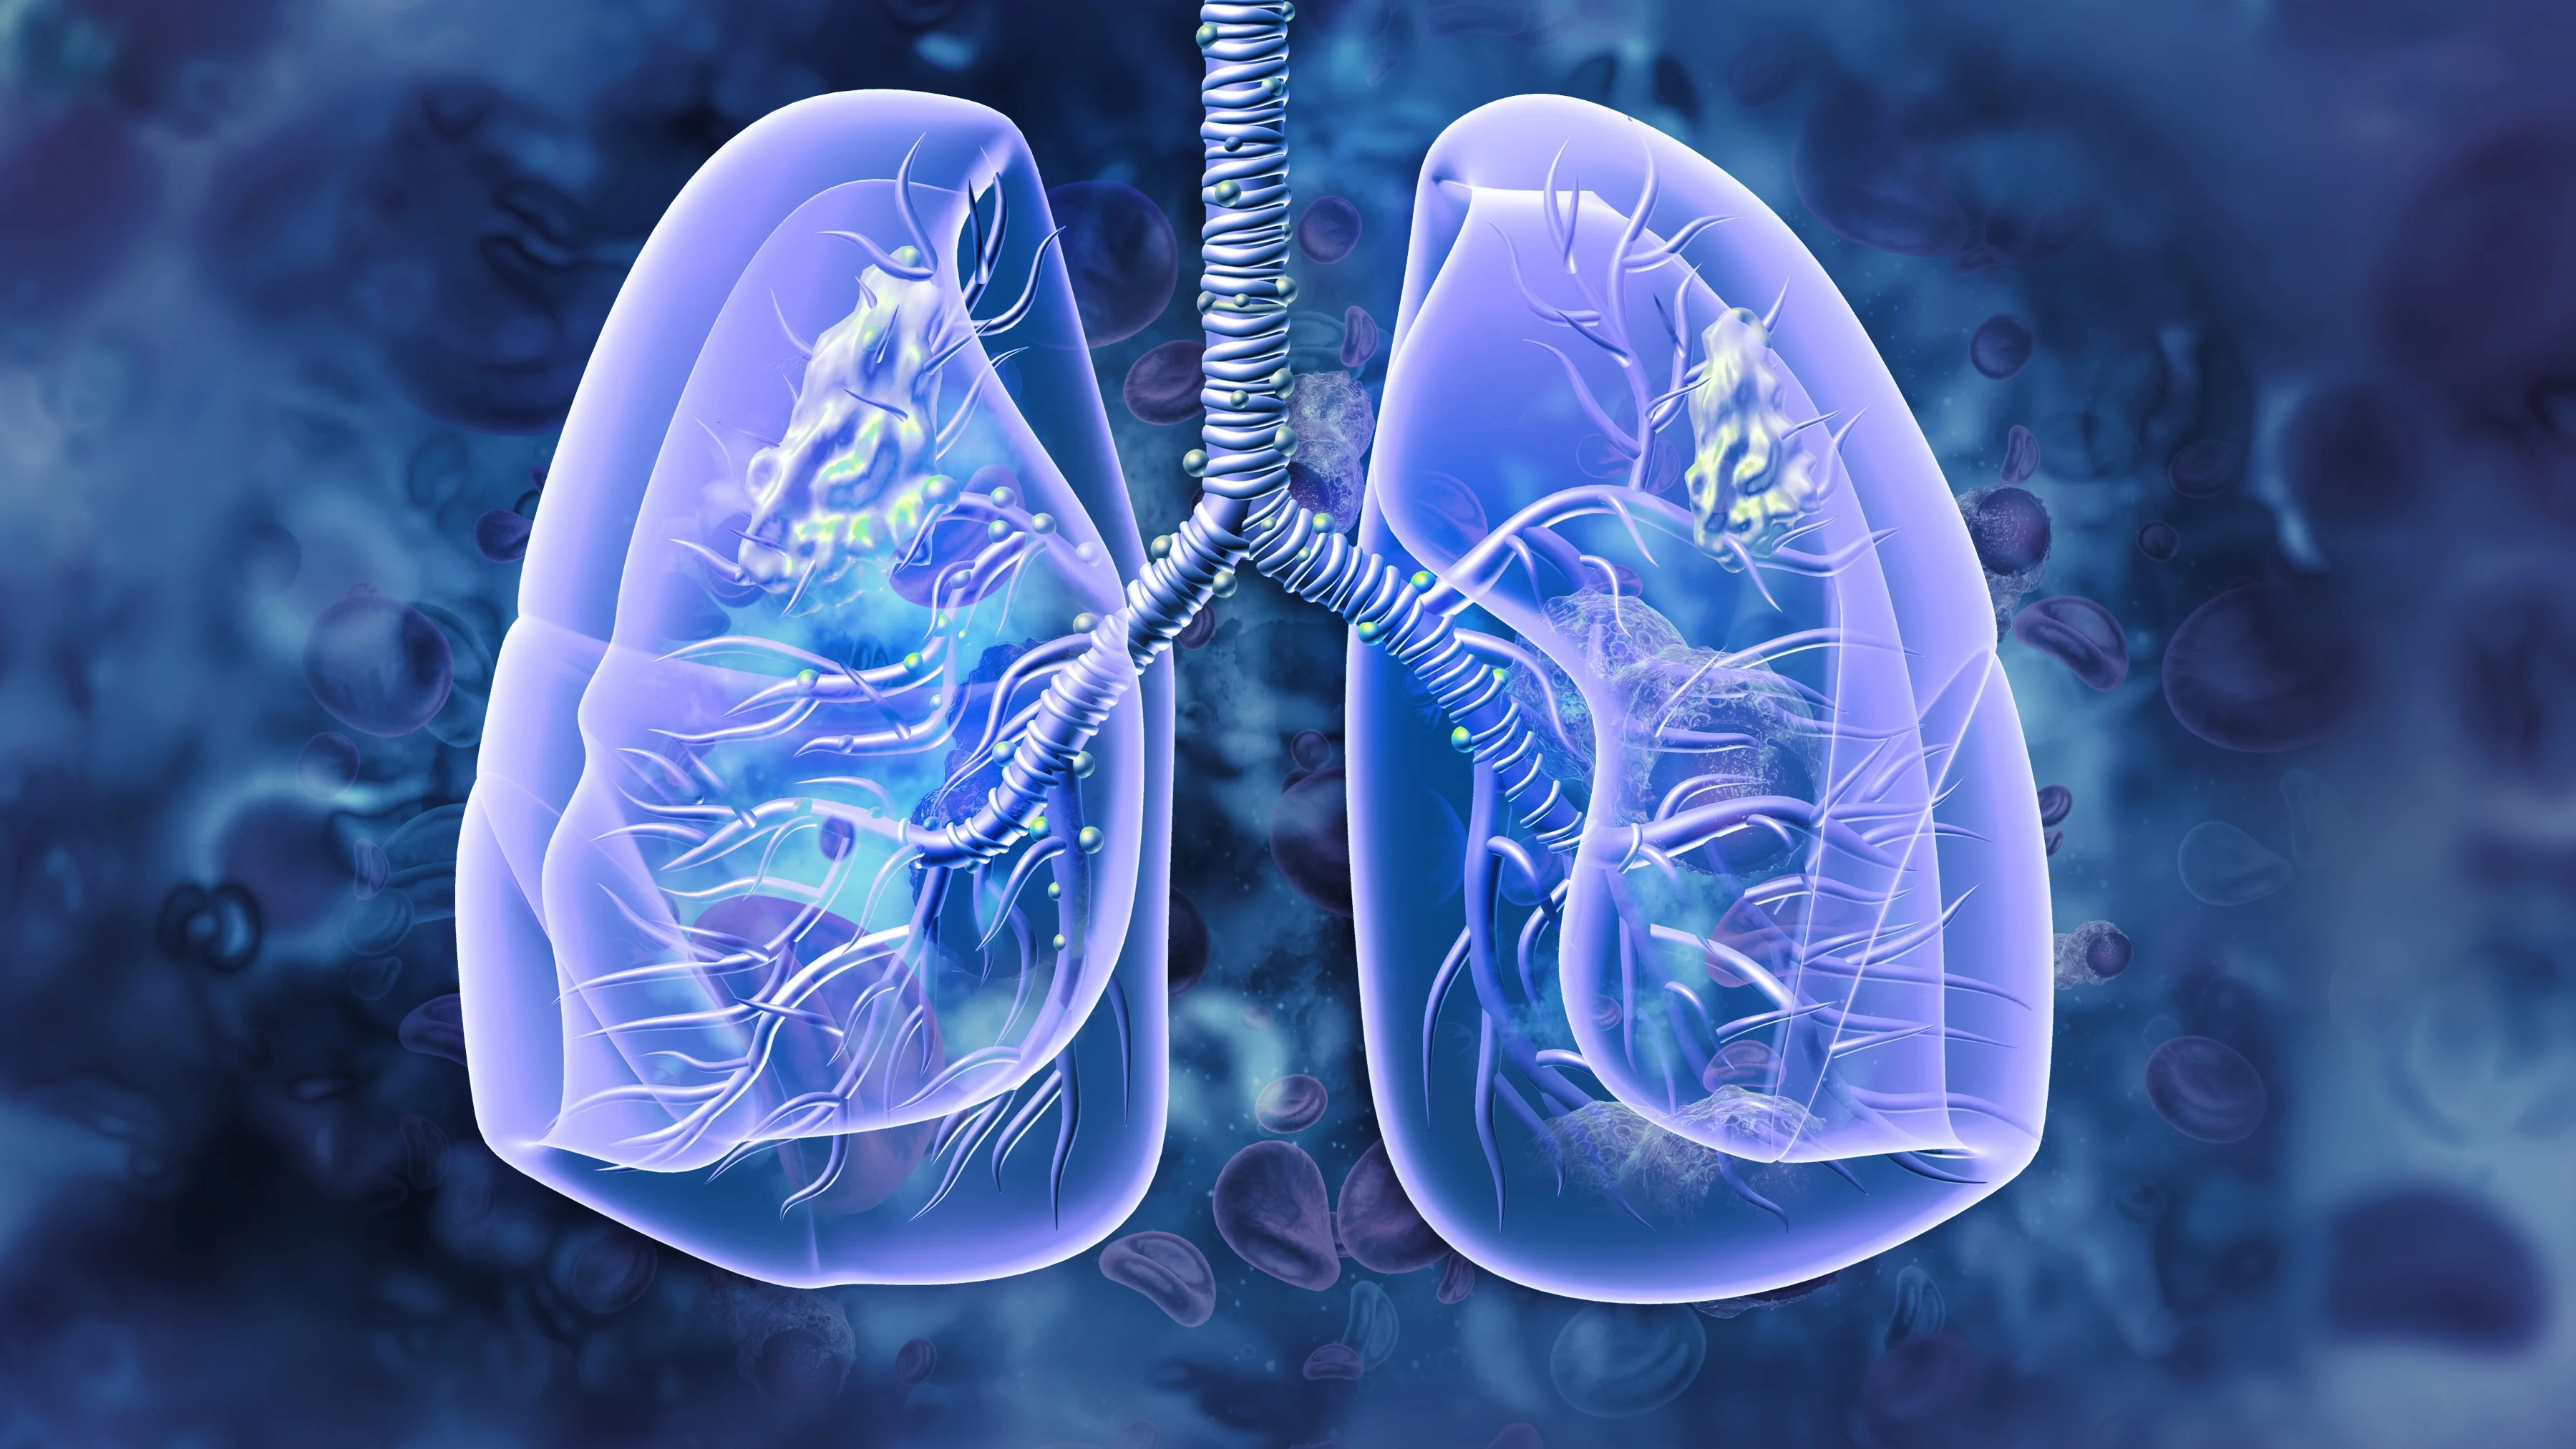 Intuitive joins $14M funding for lung cancer AI developer Optellum